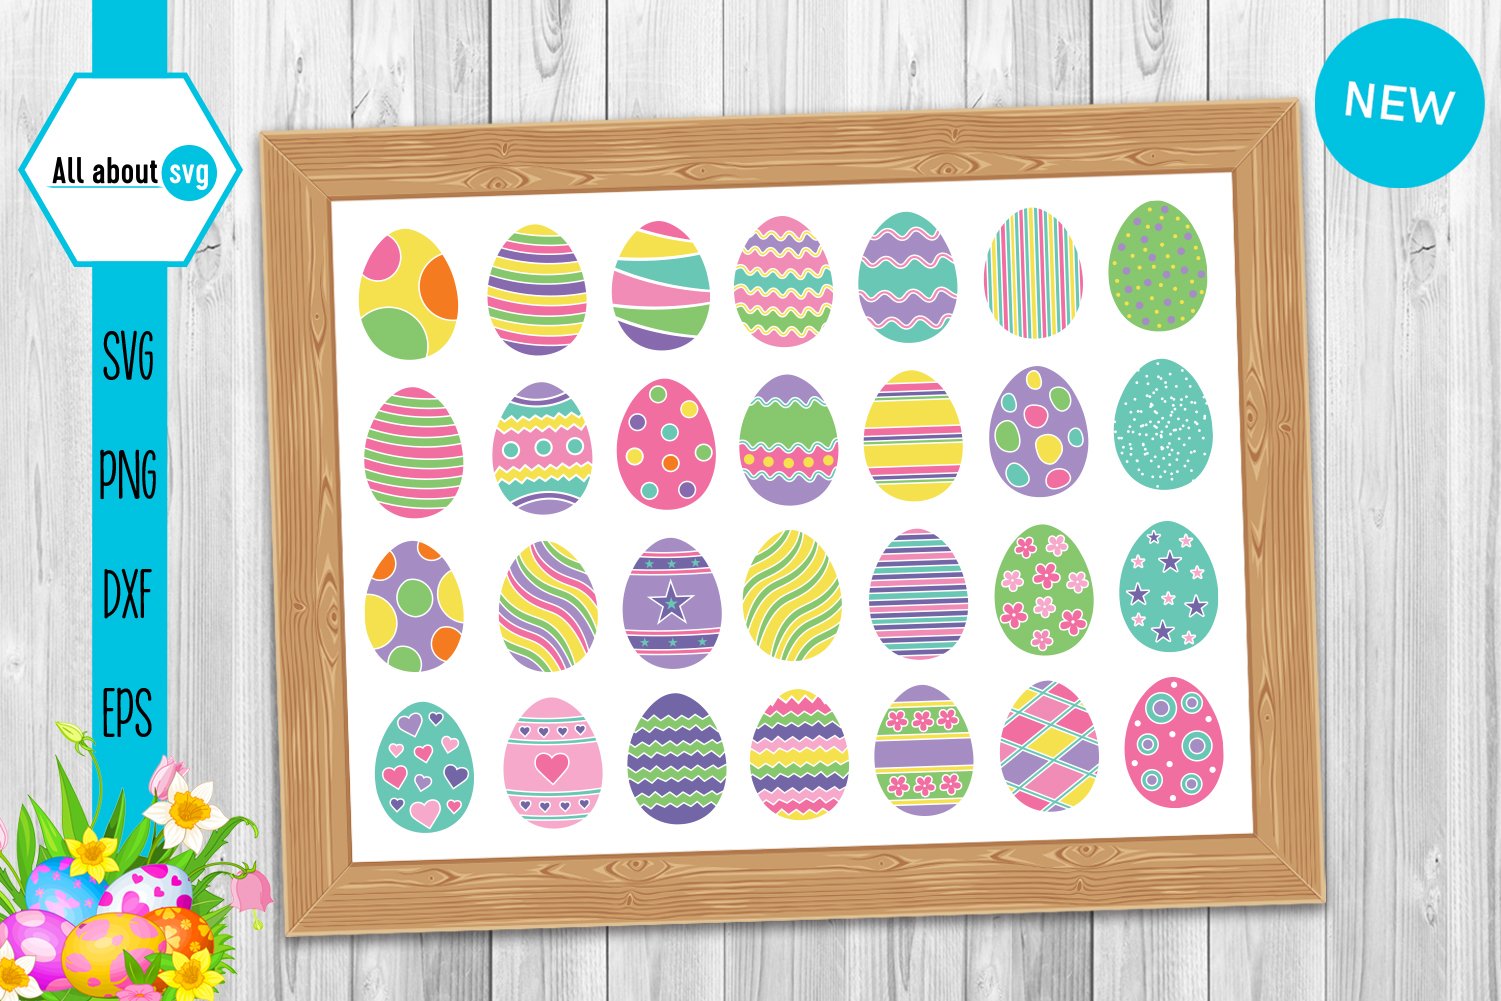 Vivid eggs with different prints.